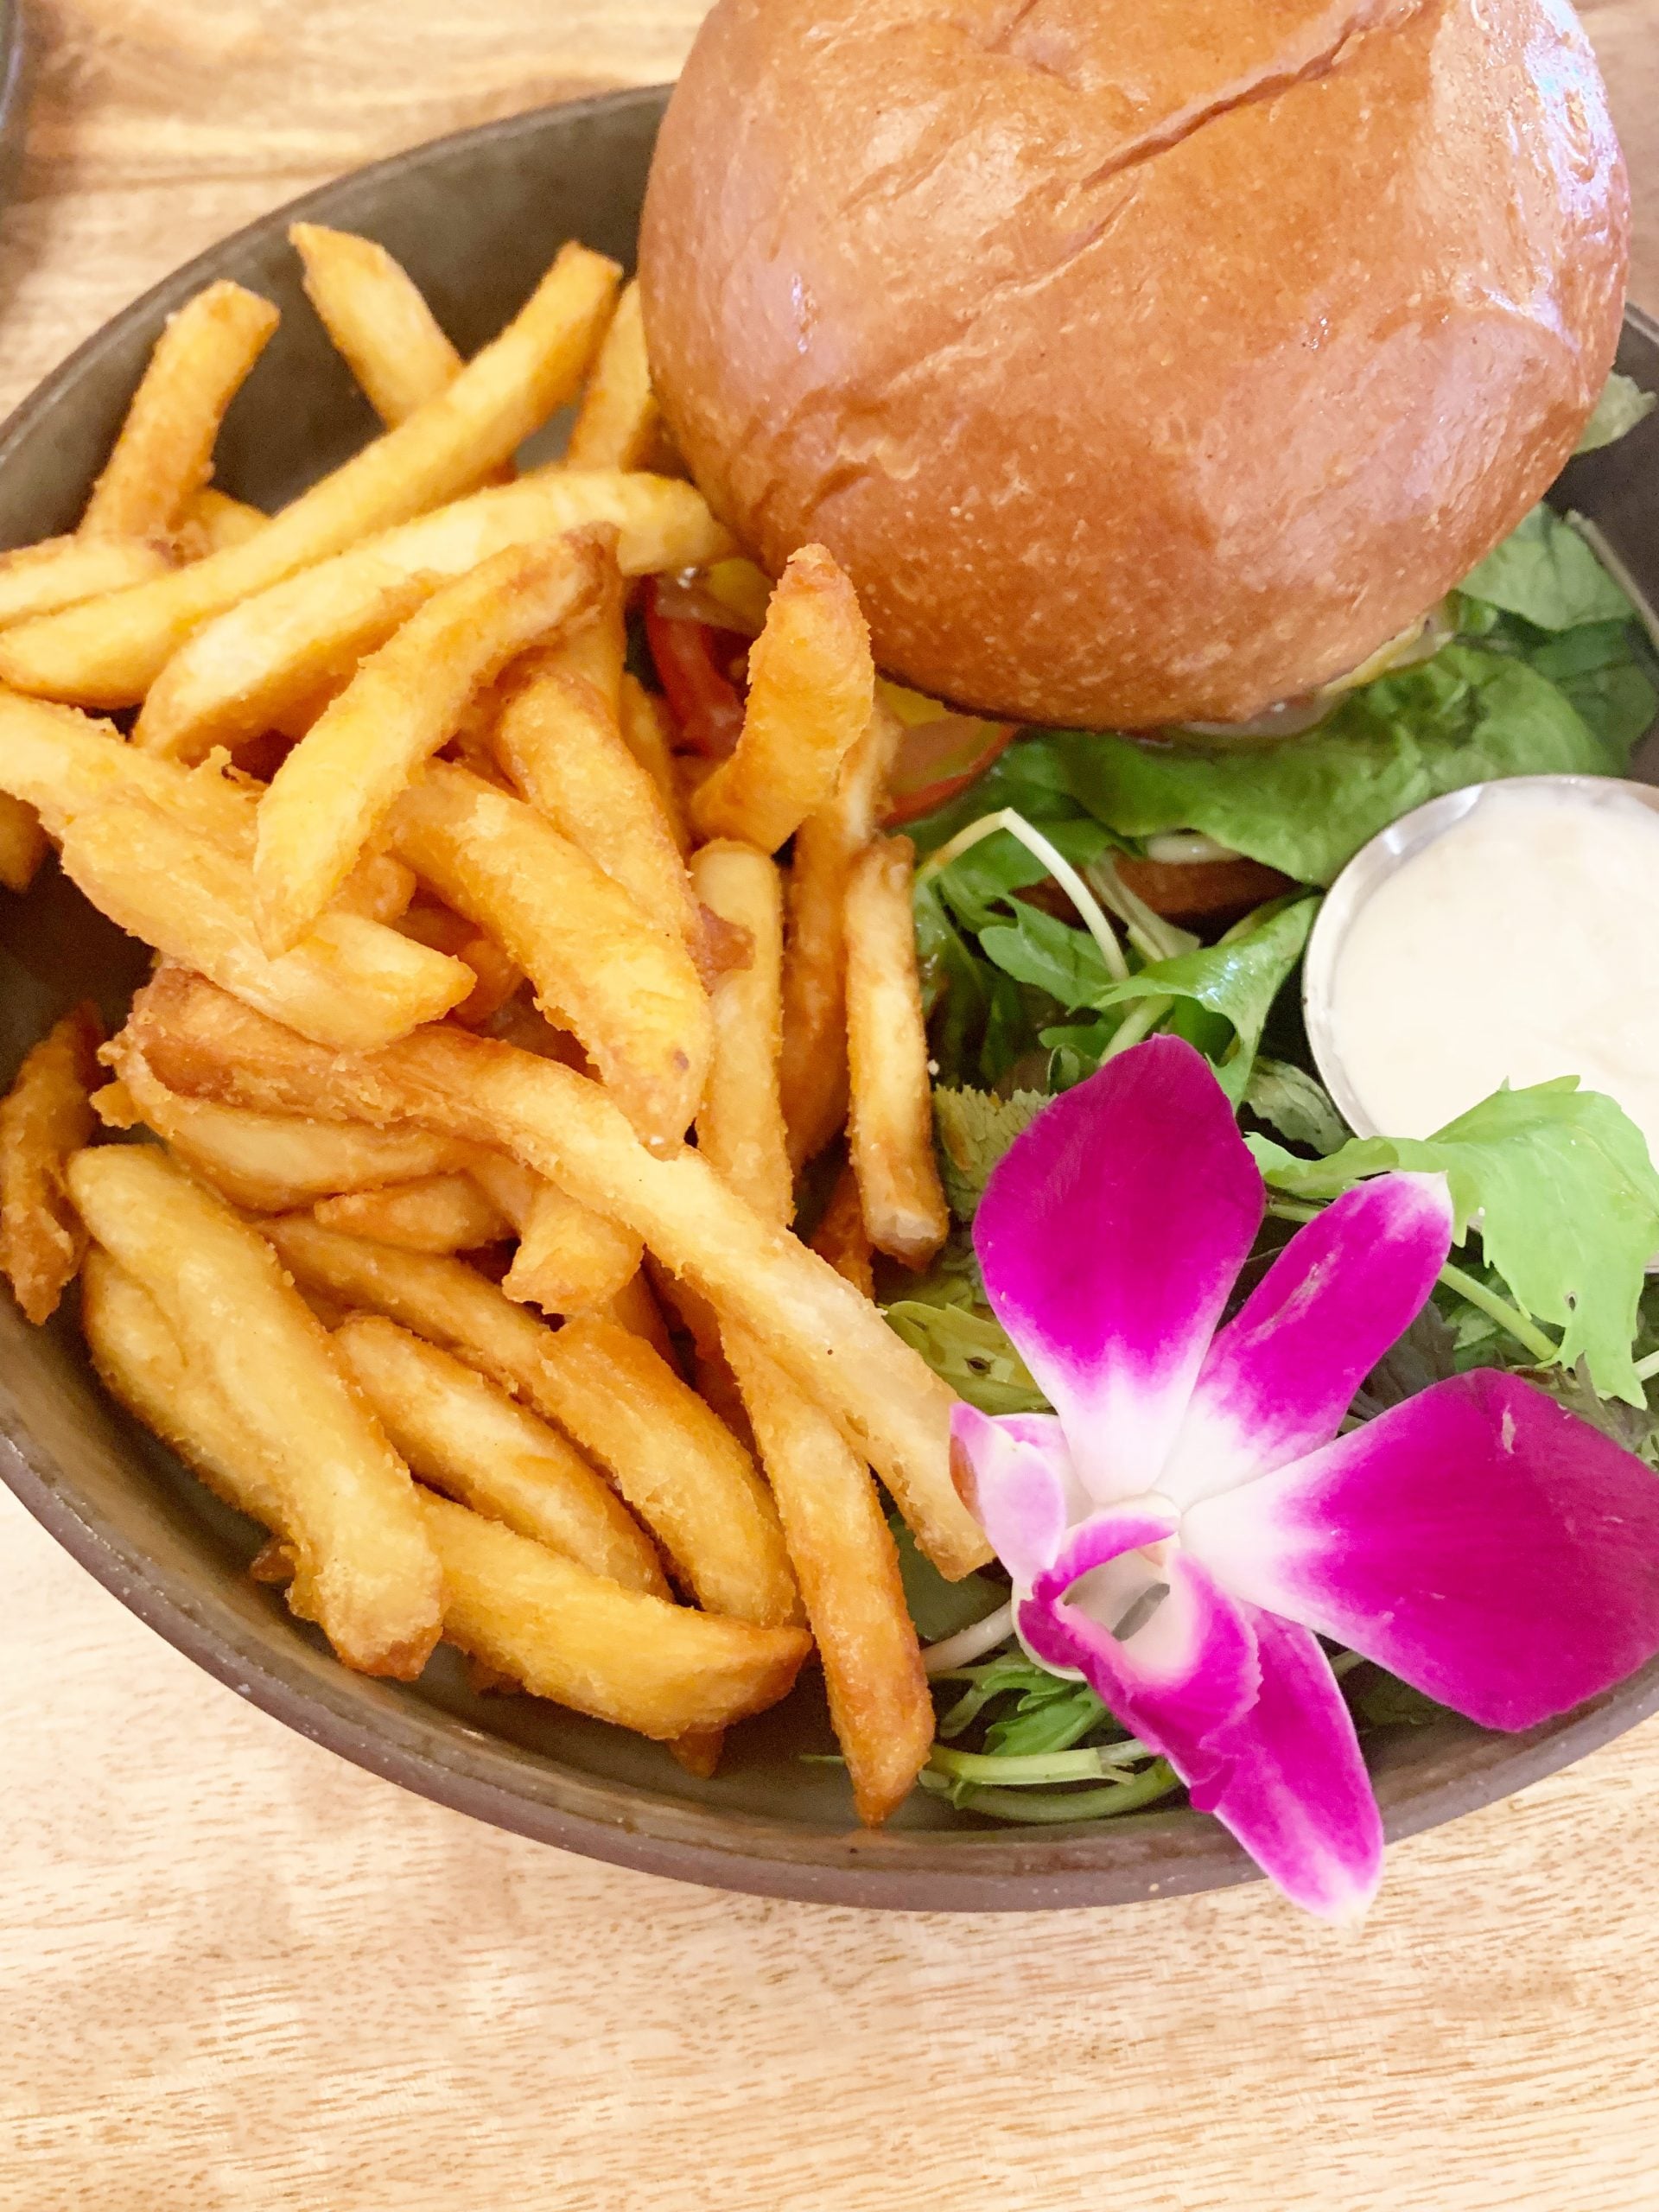 Island Vintage Wine Bar - A full guide to drinking and dining at Royal Hawaiian Center's Island Vintage Wine Bar in Waikiki! - Royal Hawaiian Center Restaurants - Wine Bar Oahu - Island Vintage Hawaii - Oahu Restaurants